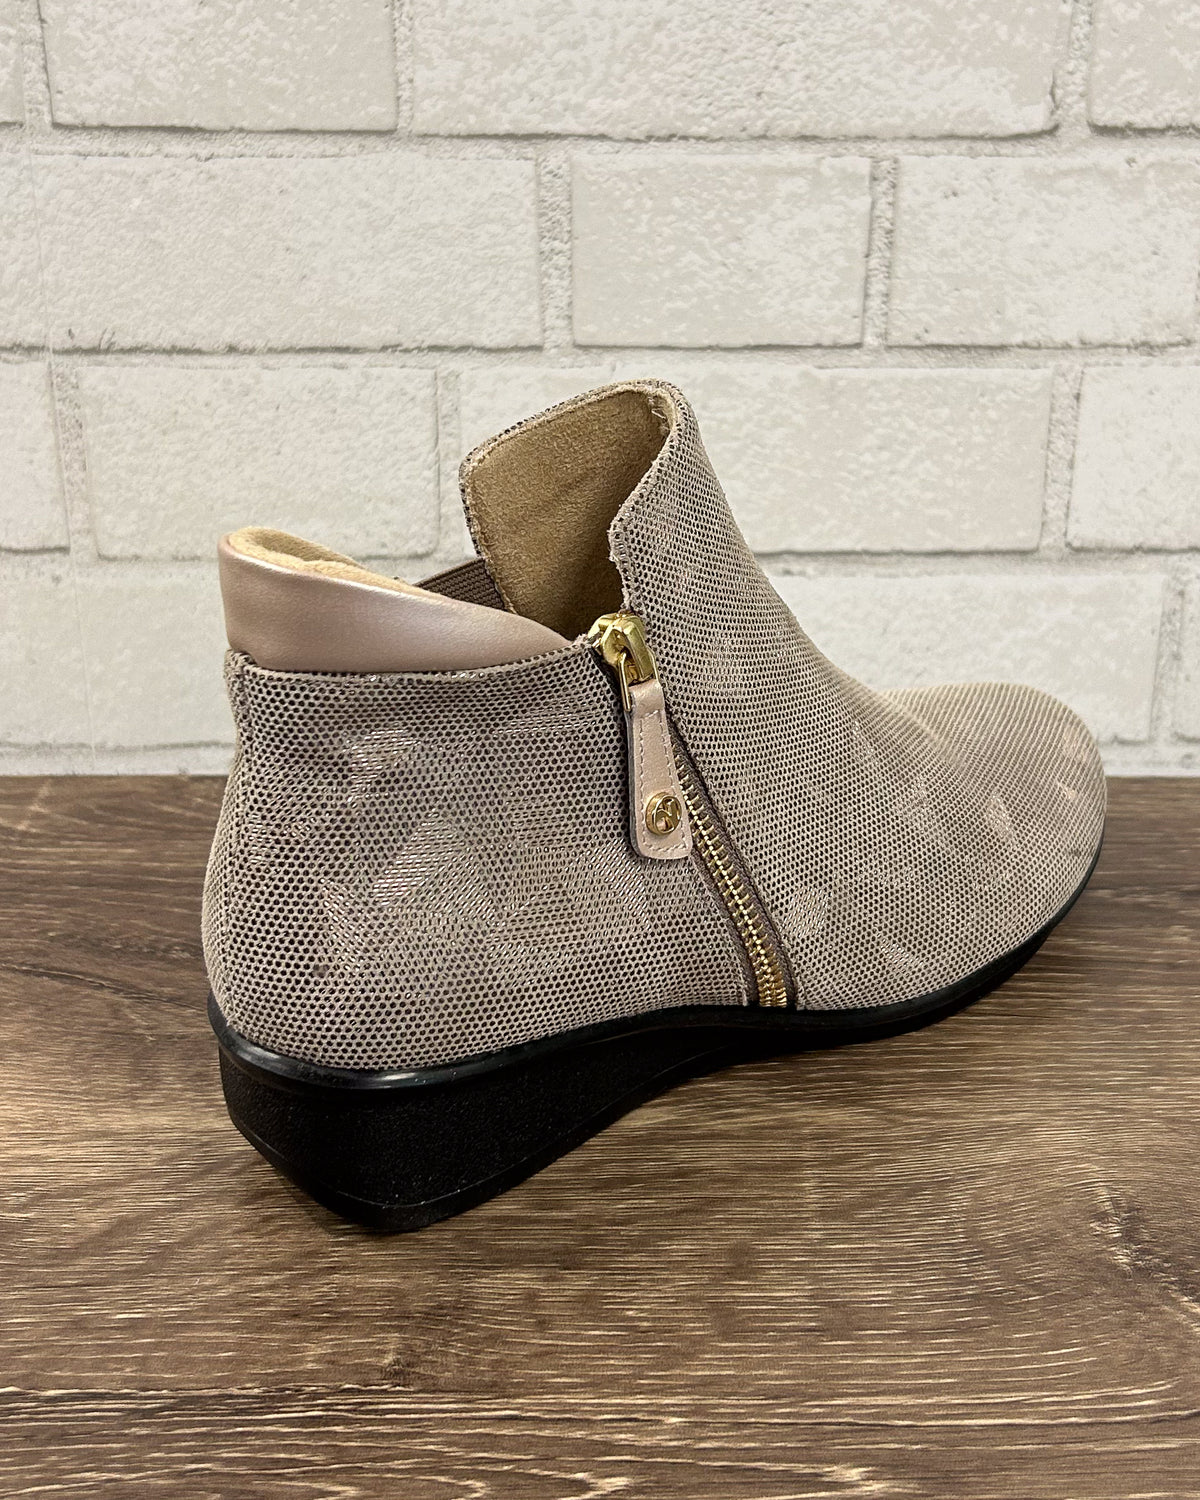 Damascus Bootie | Champagne Angle - WIDE WIDTH!